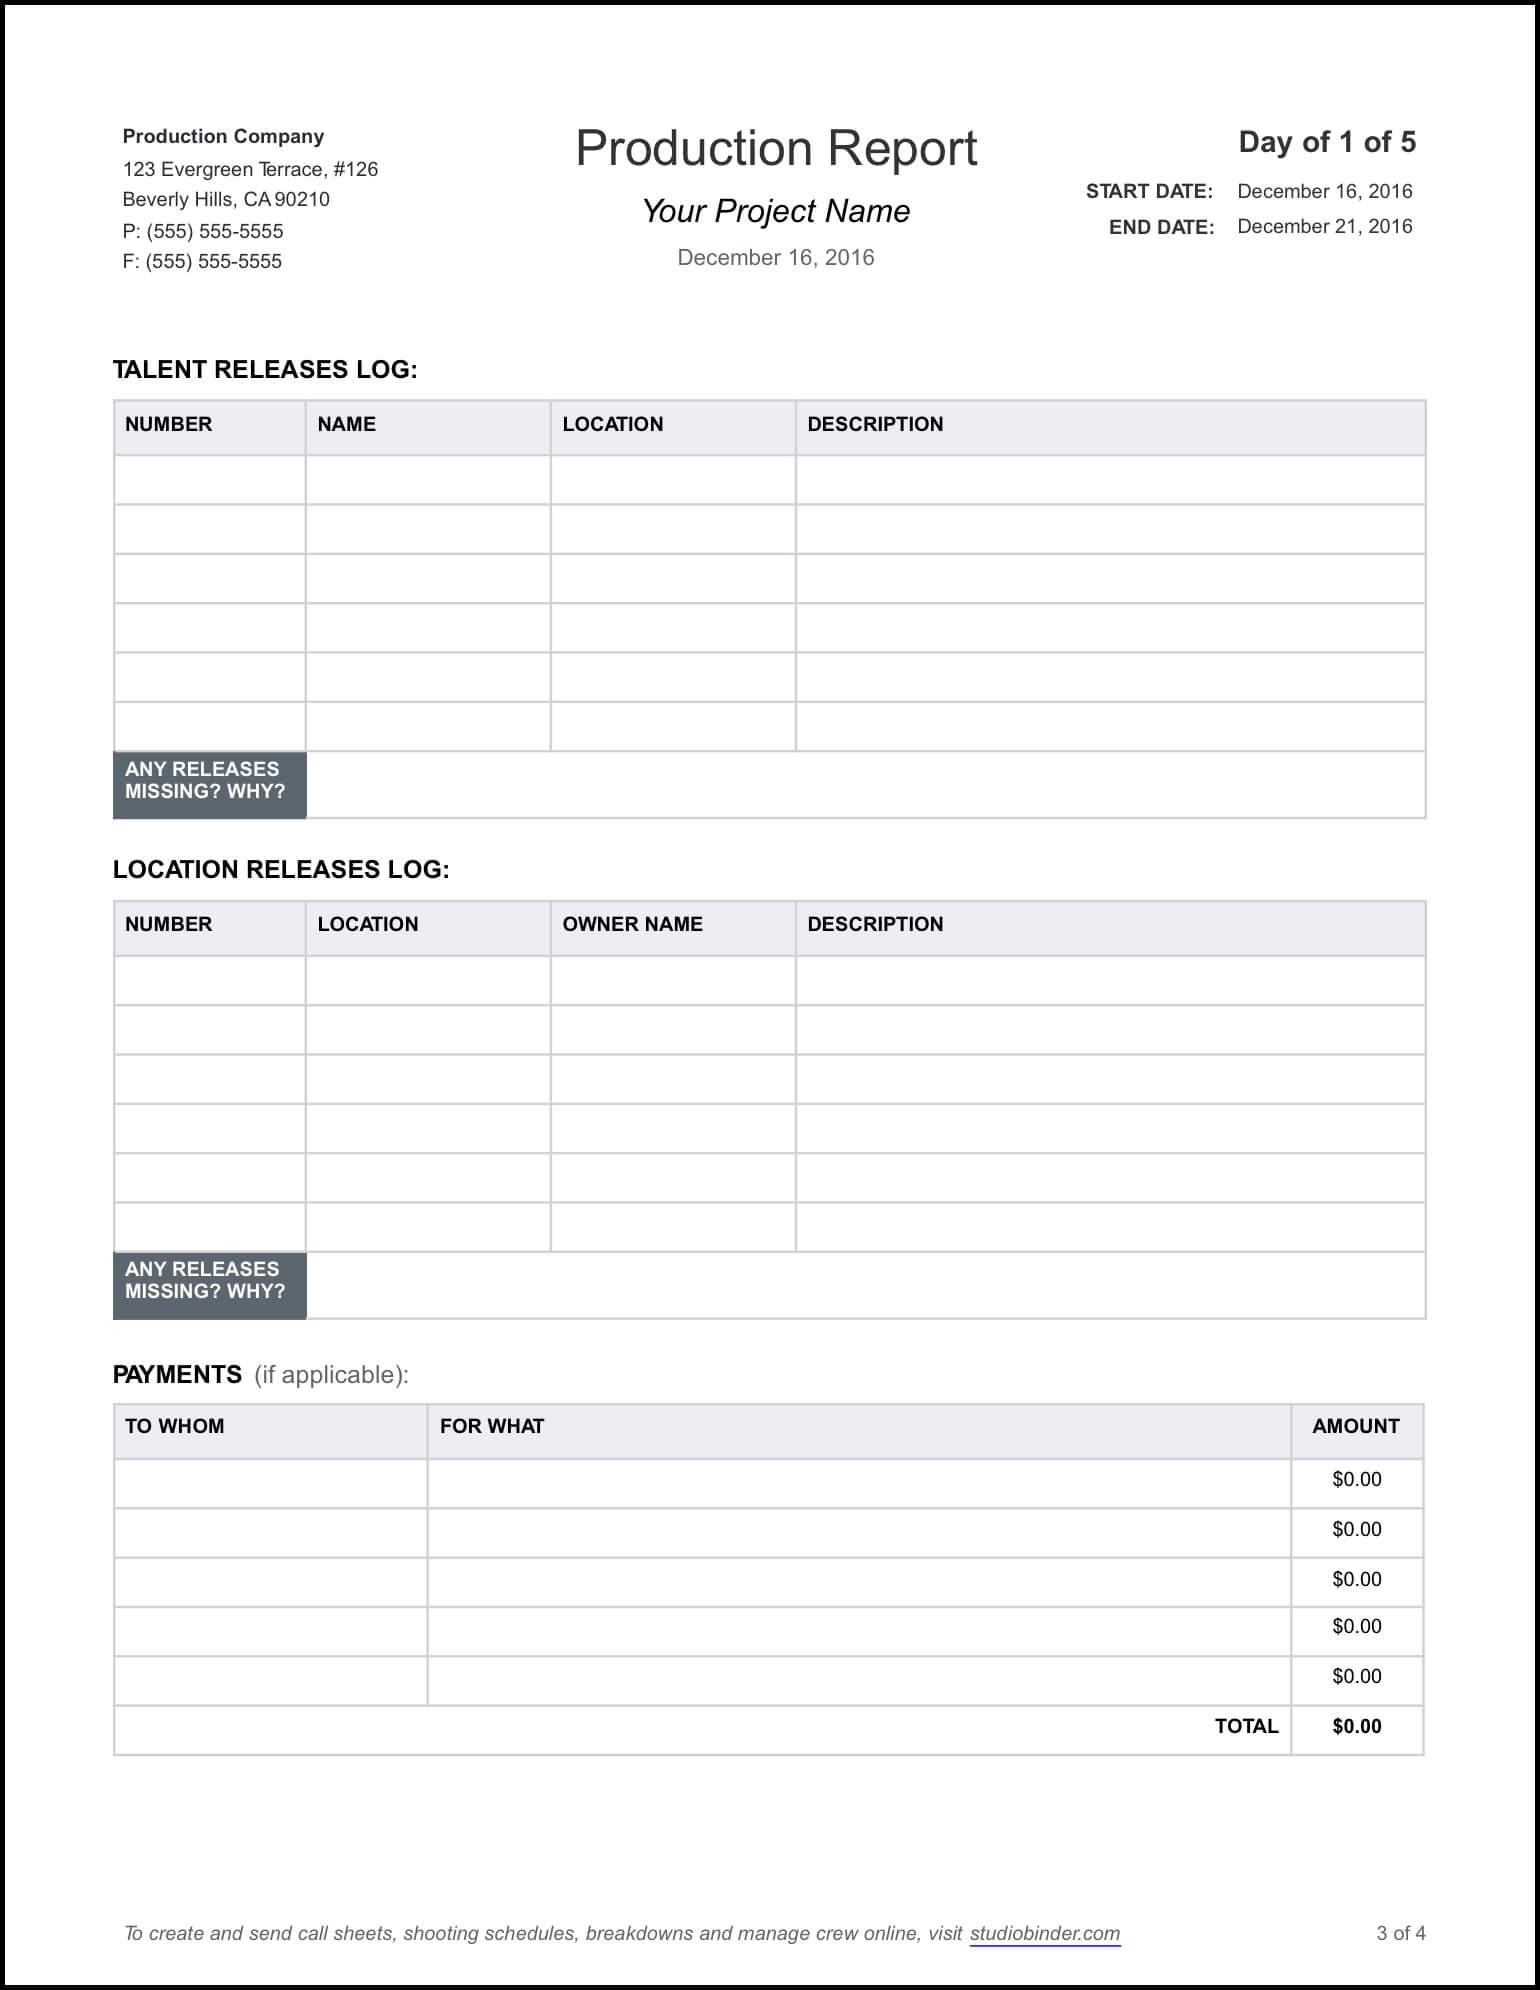 023 Daily Production Report Template Page Studiobinderx37504 Within Production Status Report Template